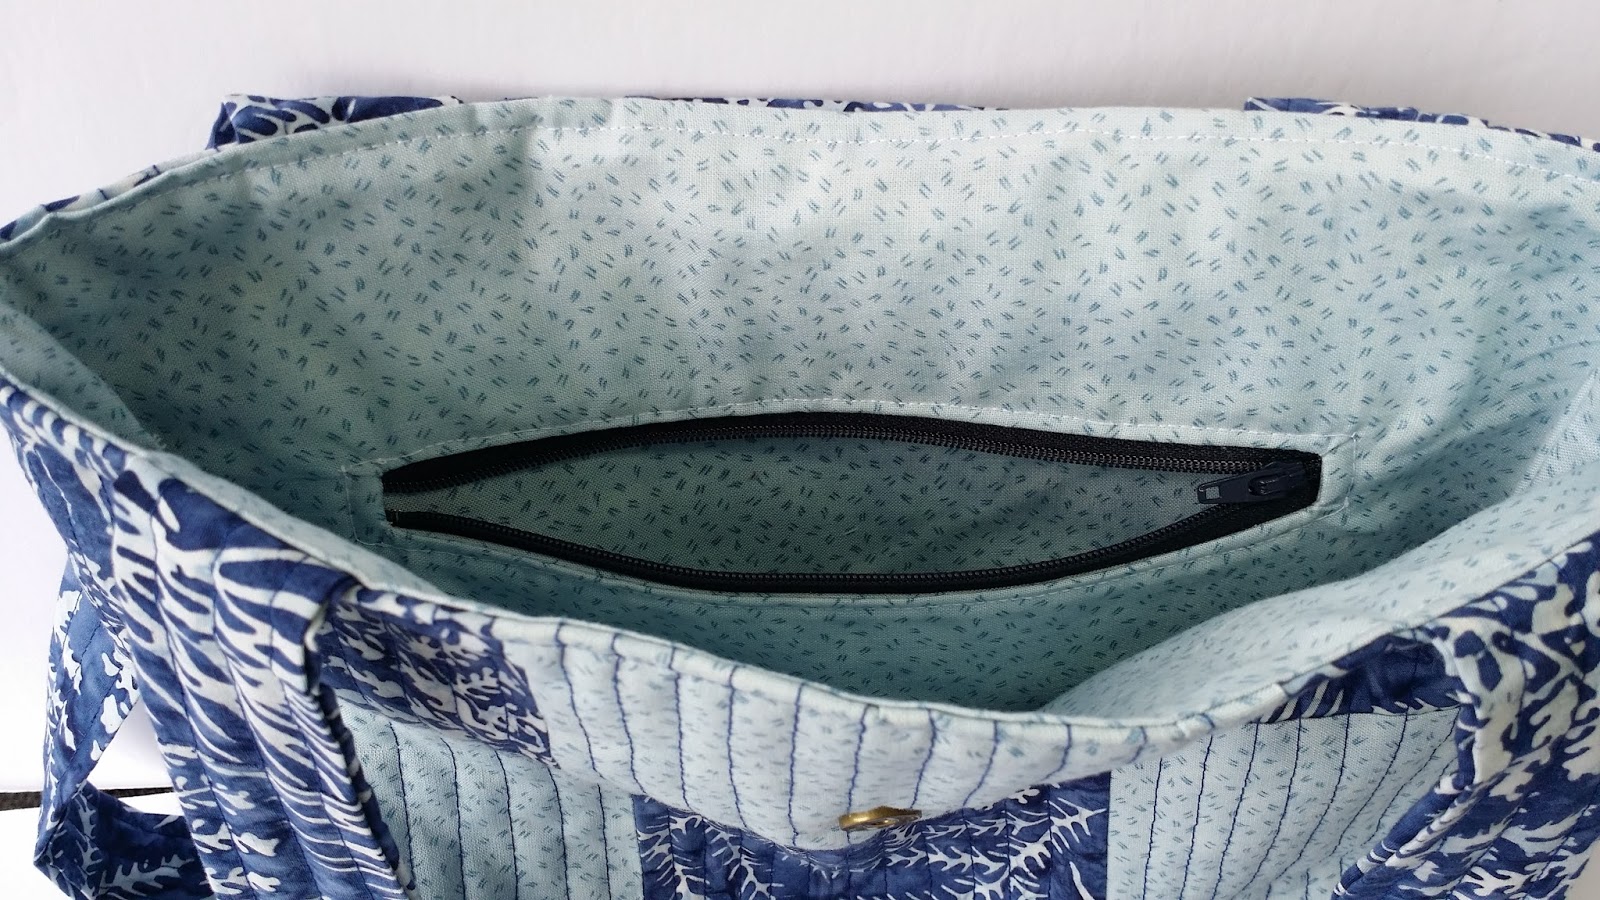 Novice Beginnings: BLUE QUILTED CHARM TOTE BAG - FREE TUTORIAL